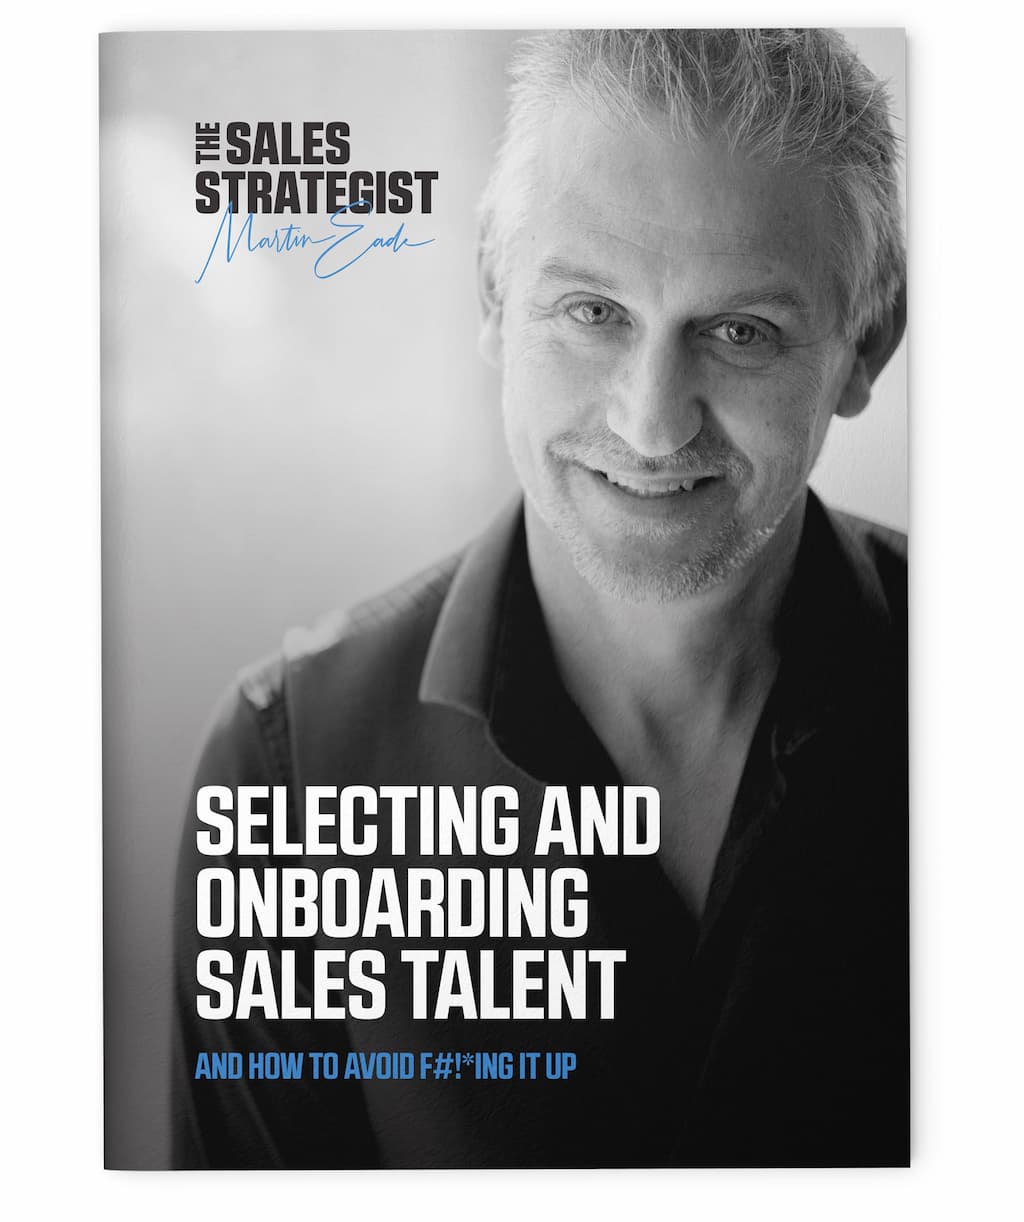 An ebook cover with Martin the Sales Strategist on the cover with the title 'Selecting and onboarding sales talent and how to avoid F#!*ing it up'